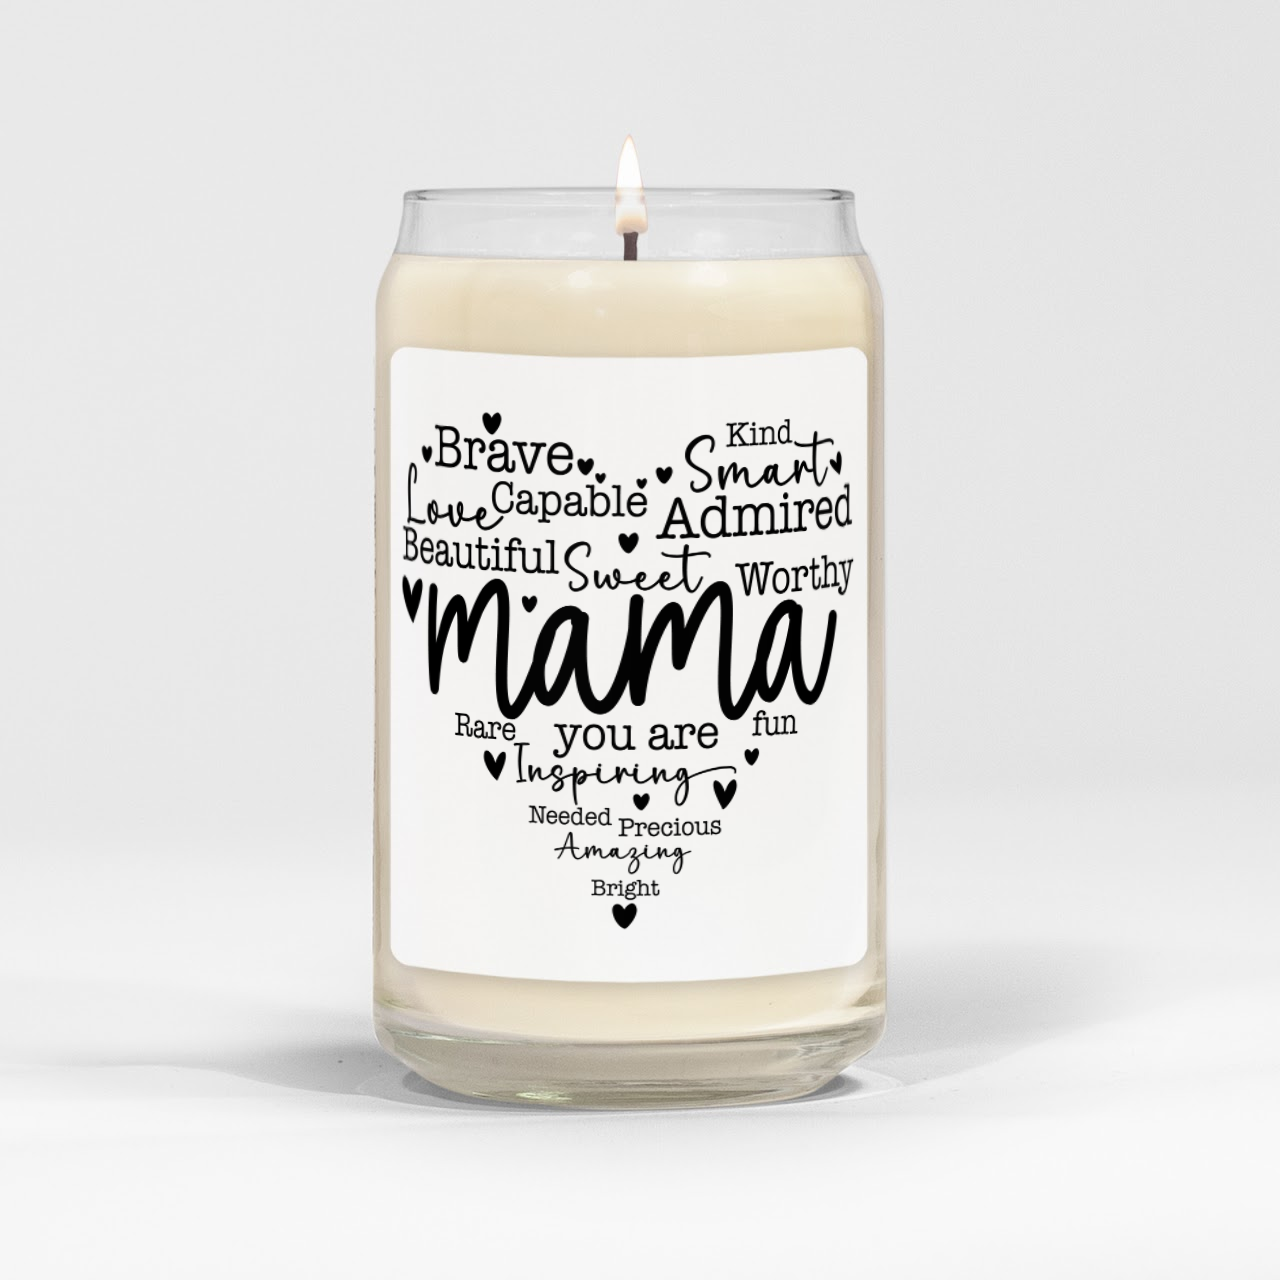 To An Amazing New Mom Candle